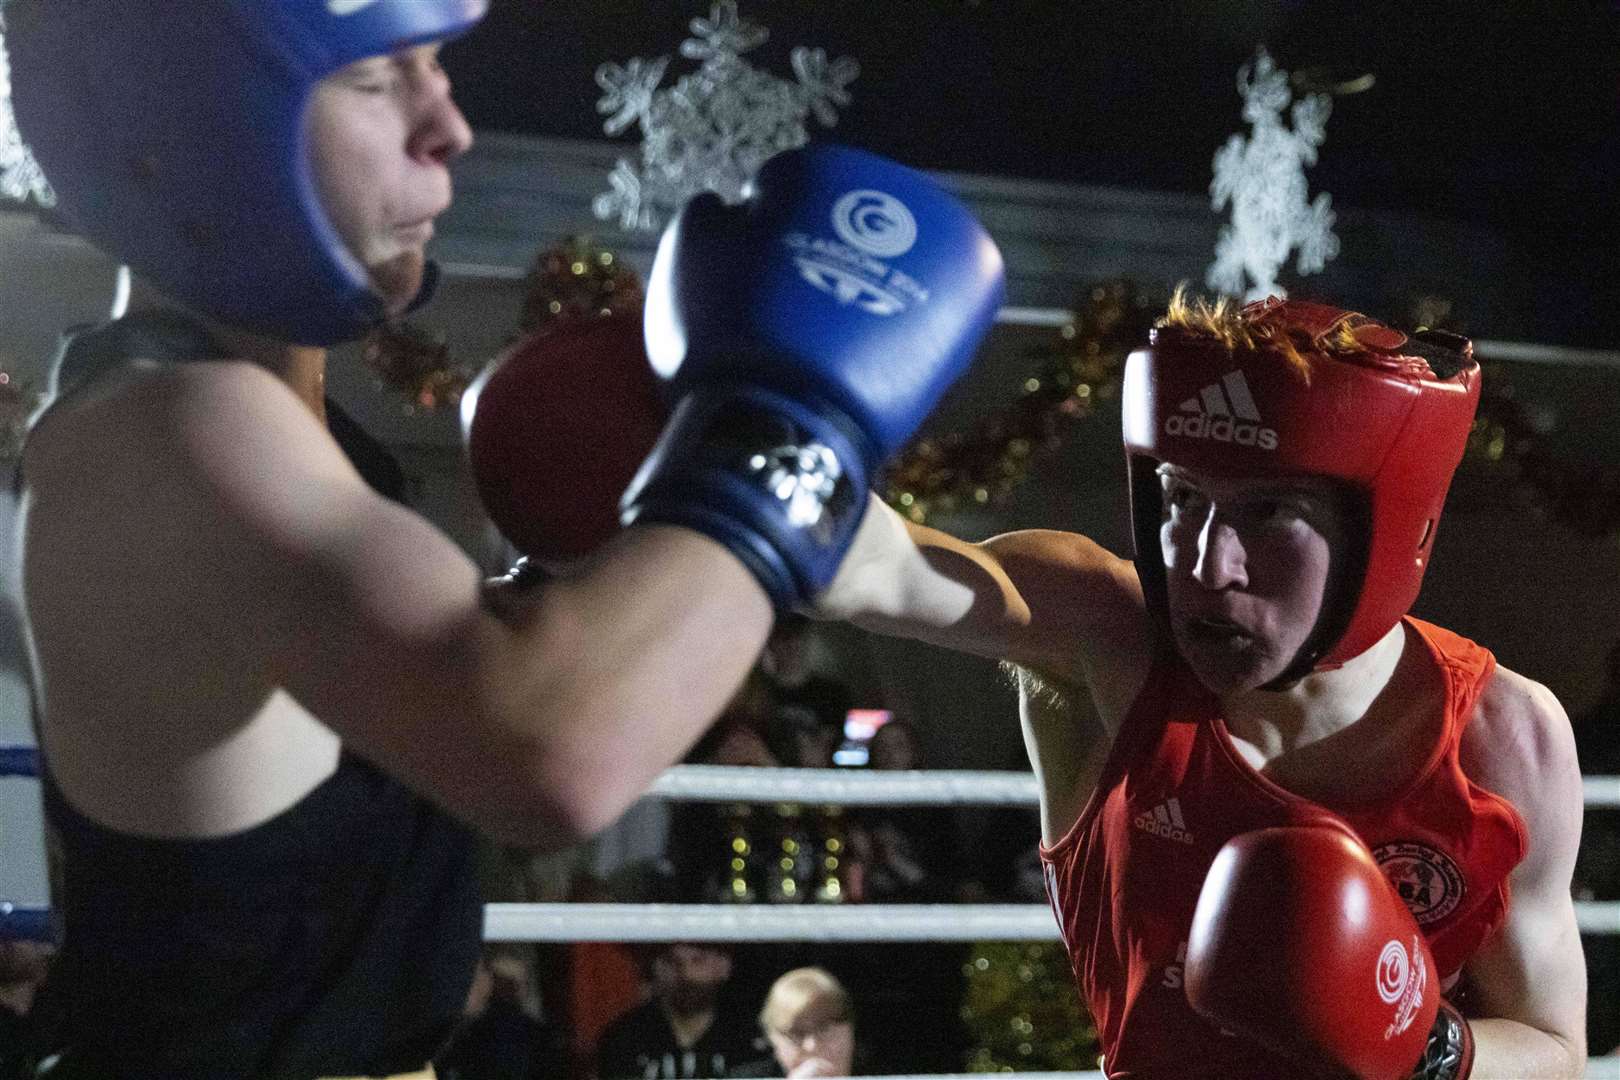 Fynlay Keenon opened Highland Boxing Academy's home show in December 2021 by picking up a unanimous decision victory over William Clark. Picture: David Rothnie